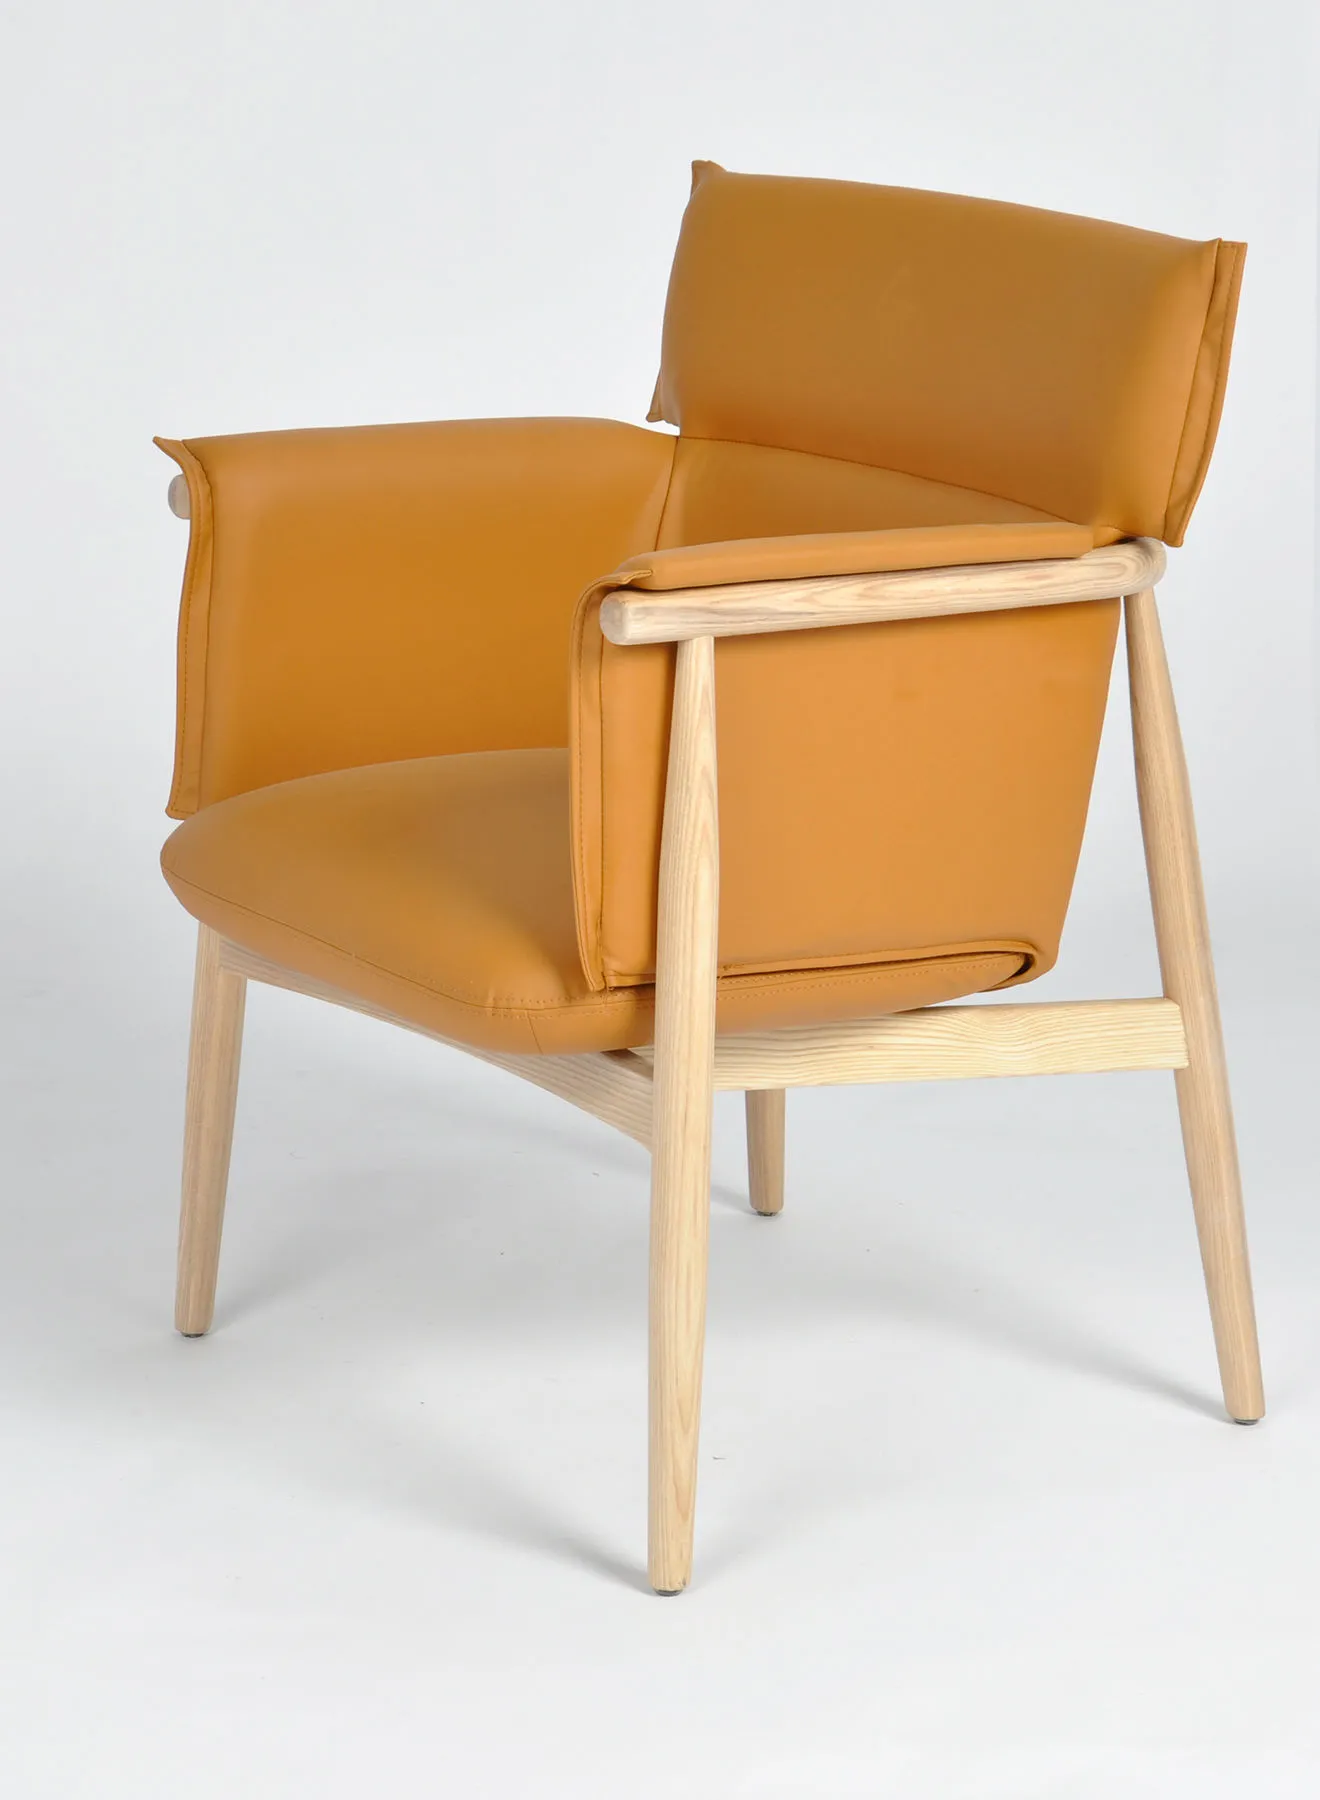 Switch Dining Chair In Orange Wooden Size 59X55X85